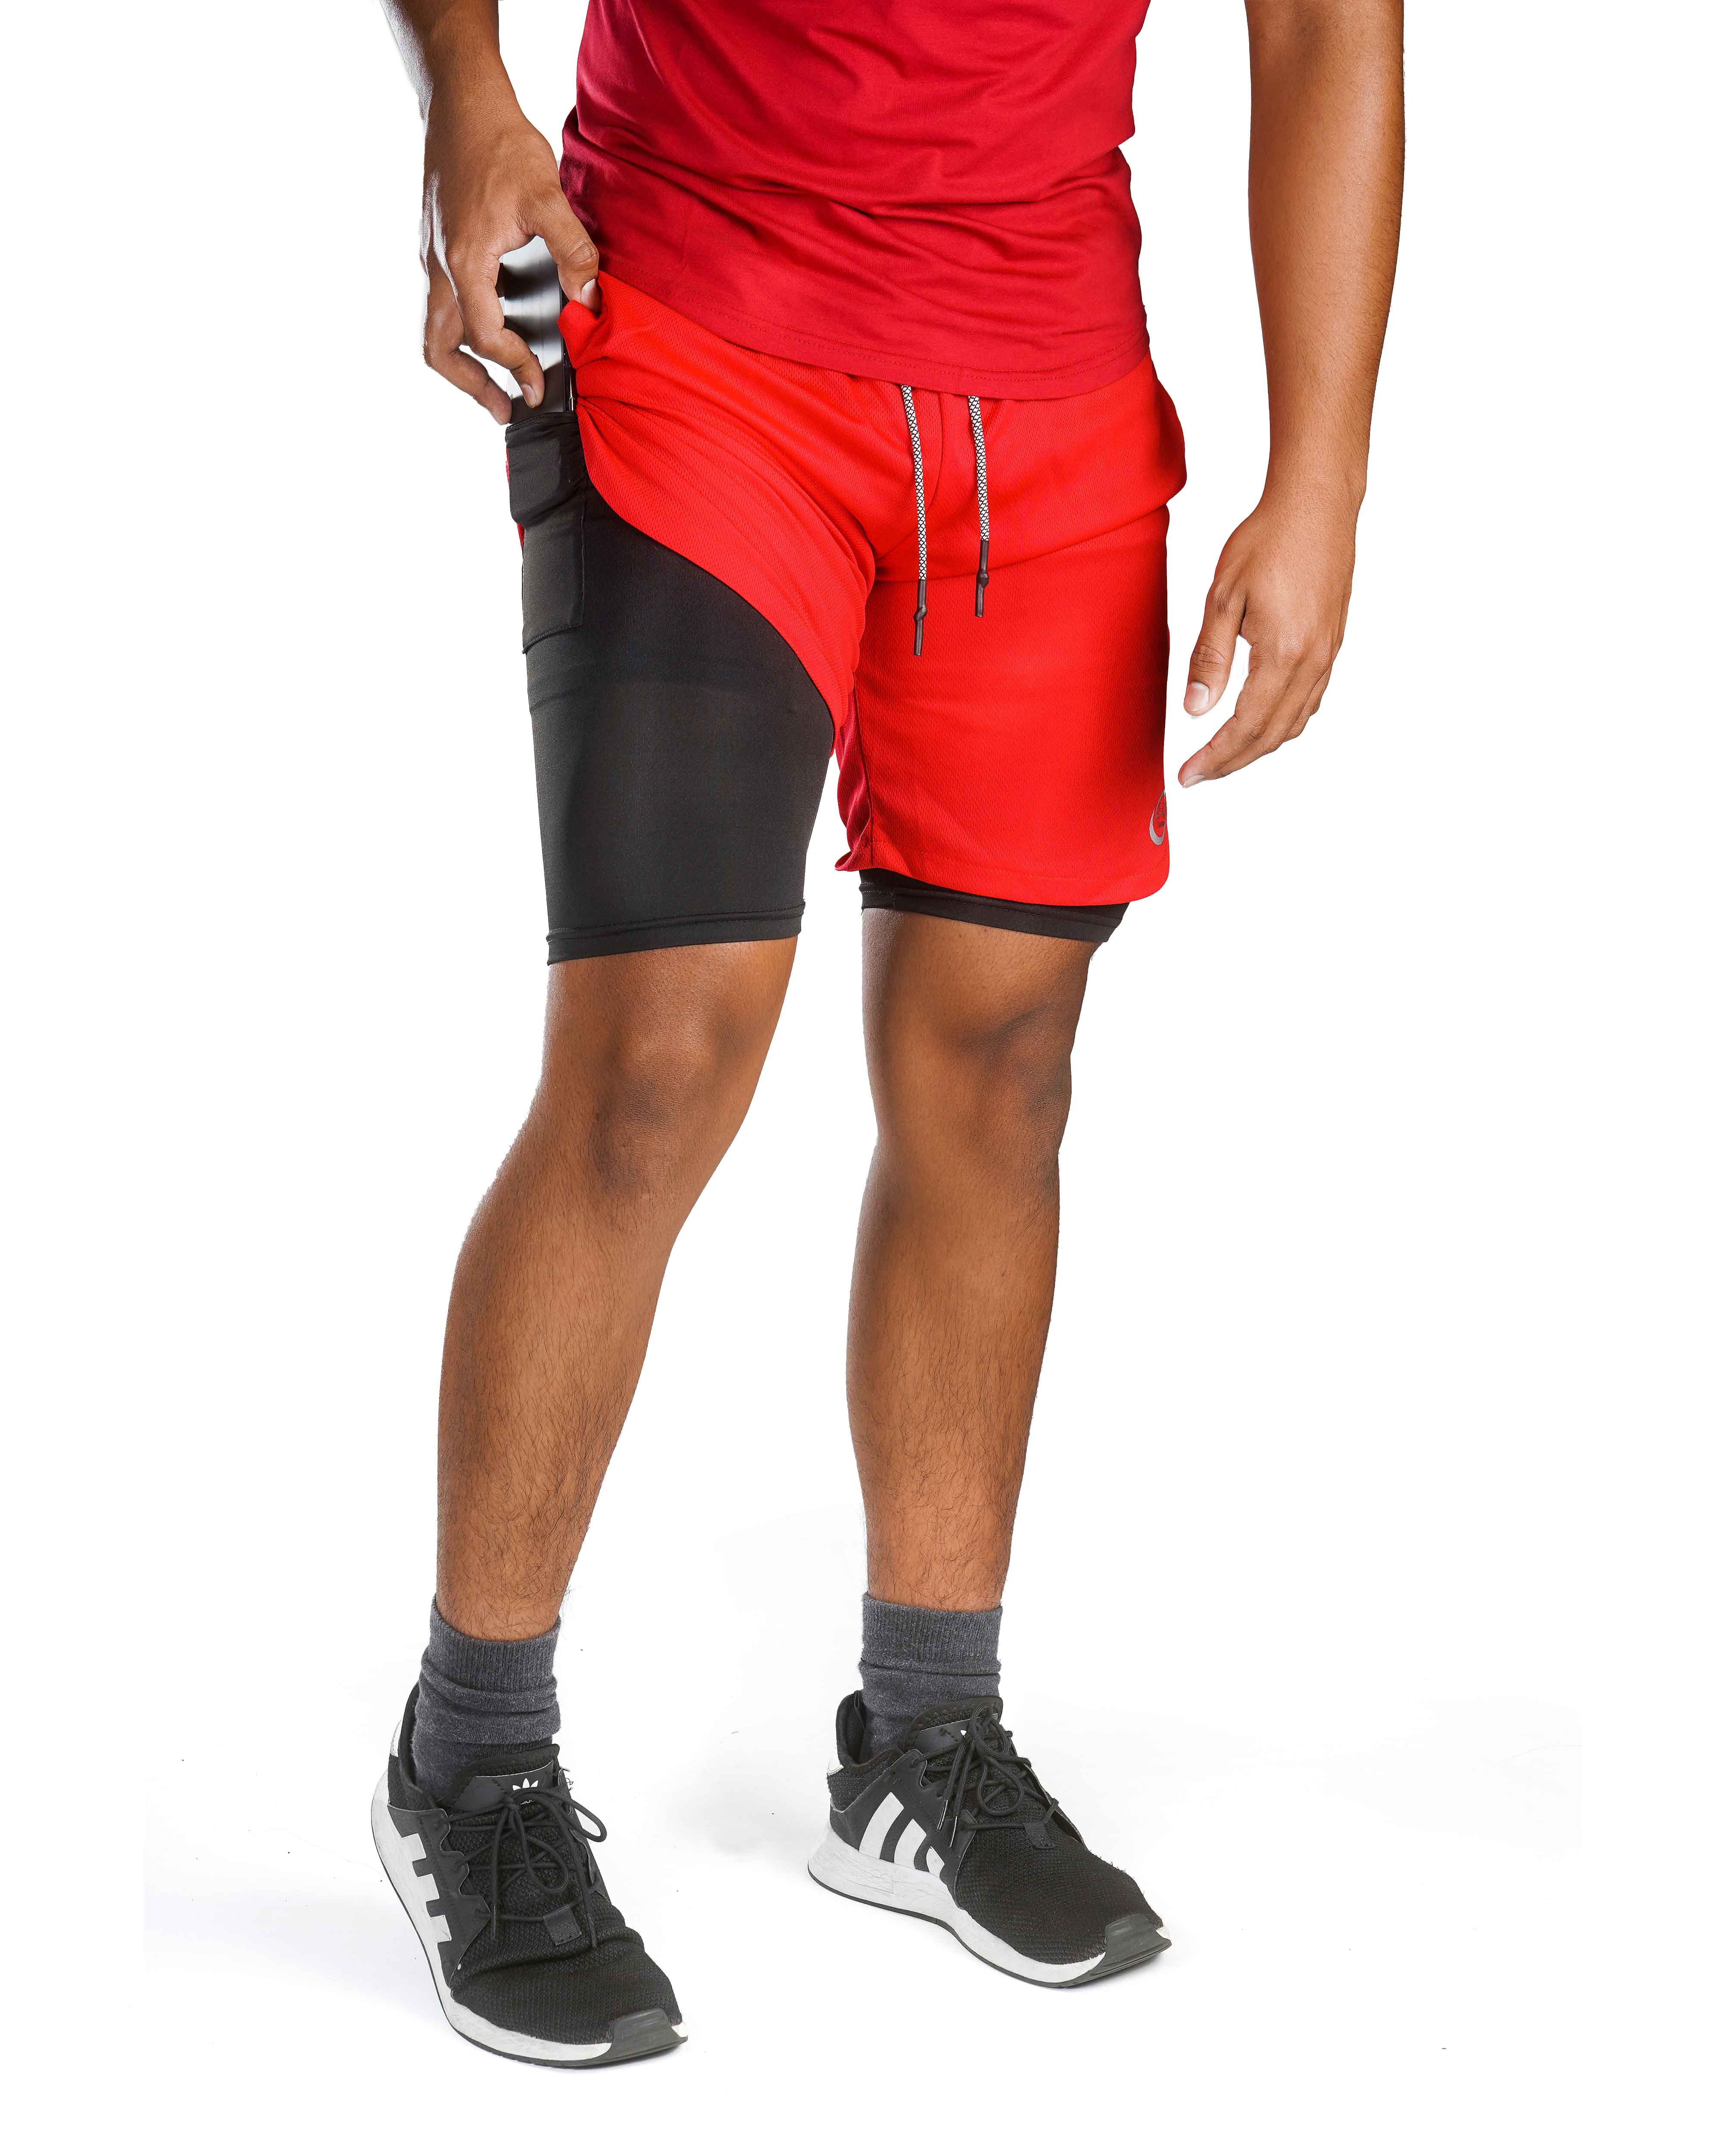 MEN'S SPORT SHORTS 2 IN ONE WITH PHONE POCKET (Run a size smaller)